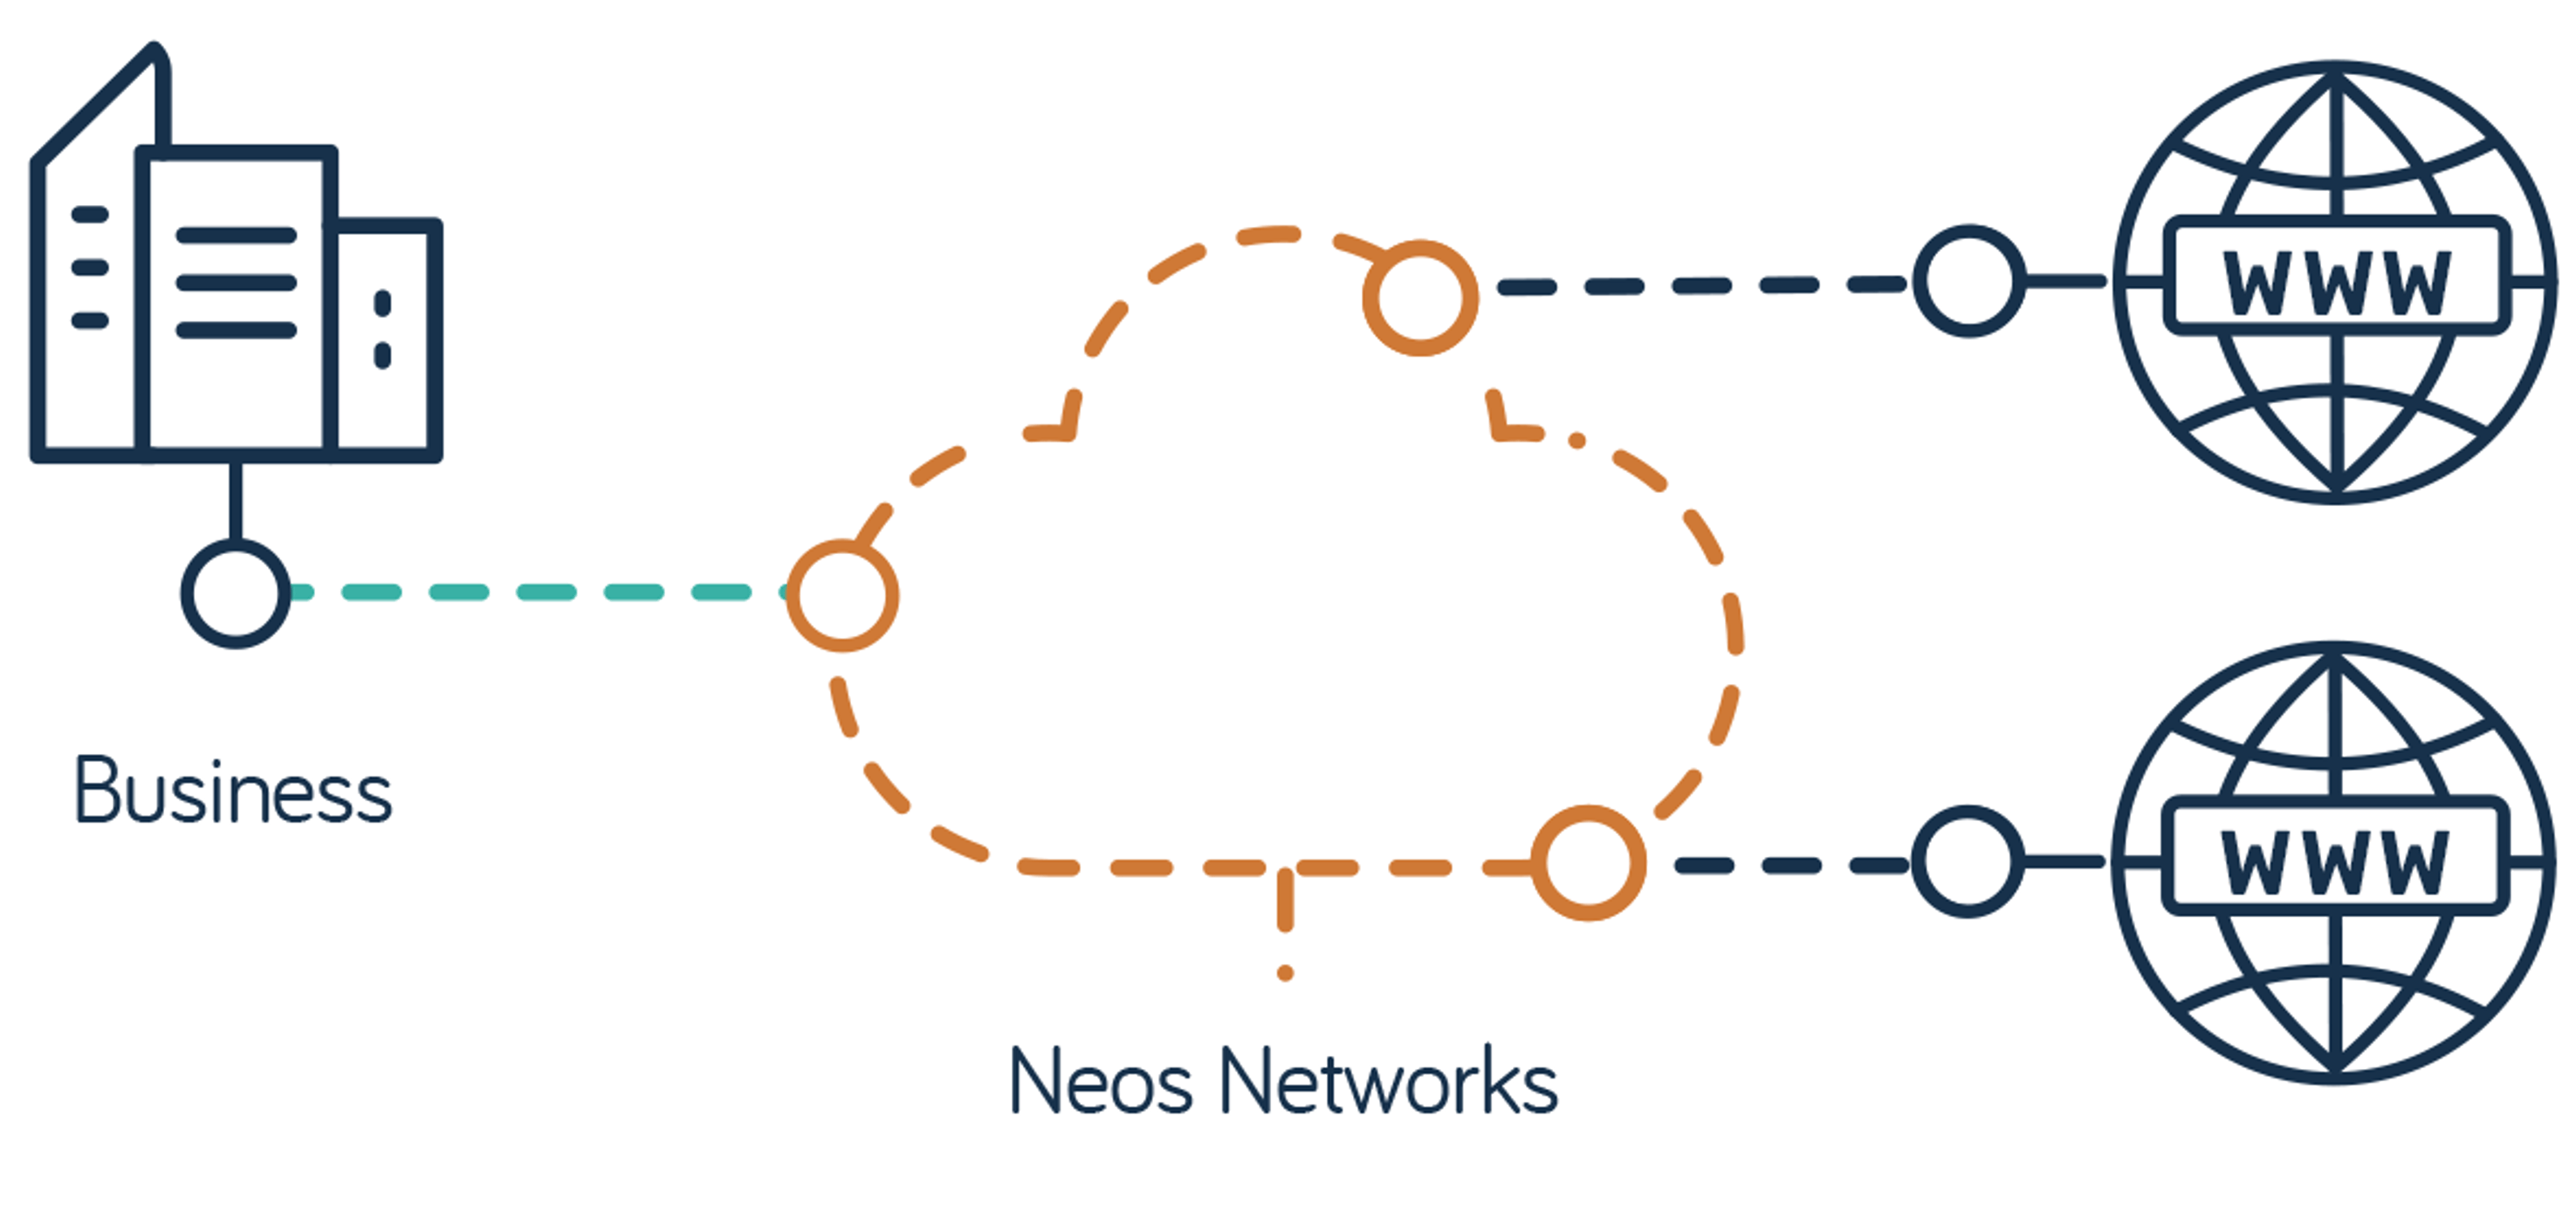 Diagram of Neos Networks Dedicated Internet Access service, showing how your business connects to the internet via a leased line to Neos Networks' core network